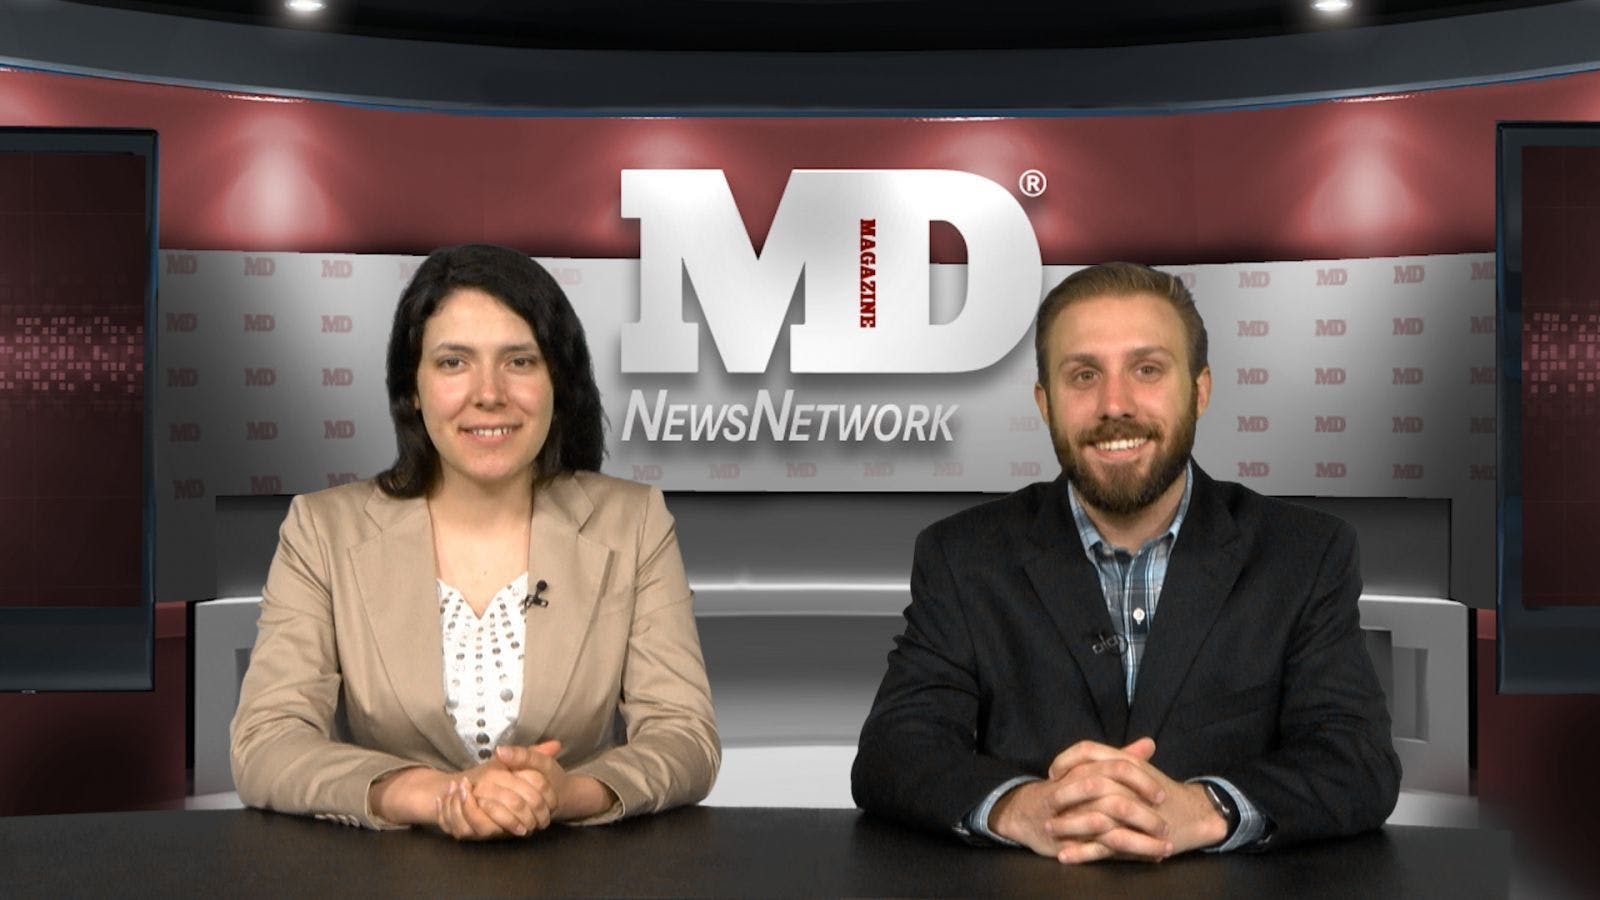 MDNN: ADHD and Eating Disorders, Opioid Funding, Overworked Nurses